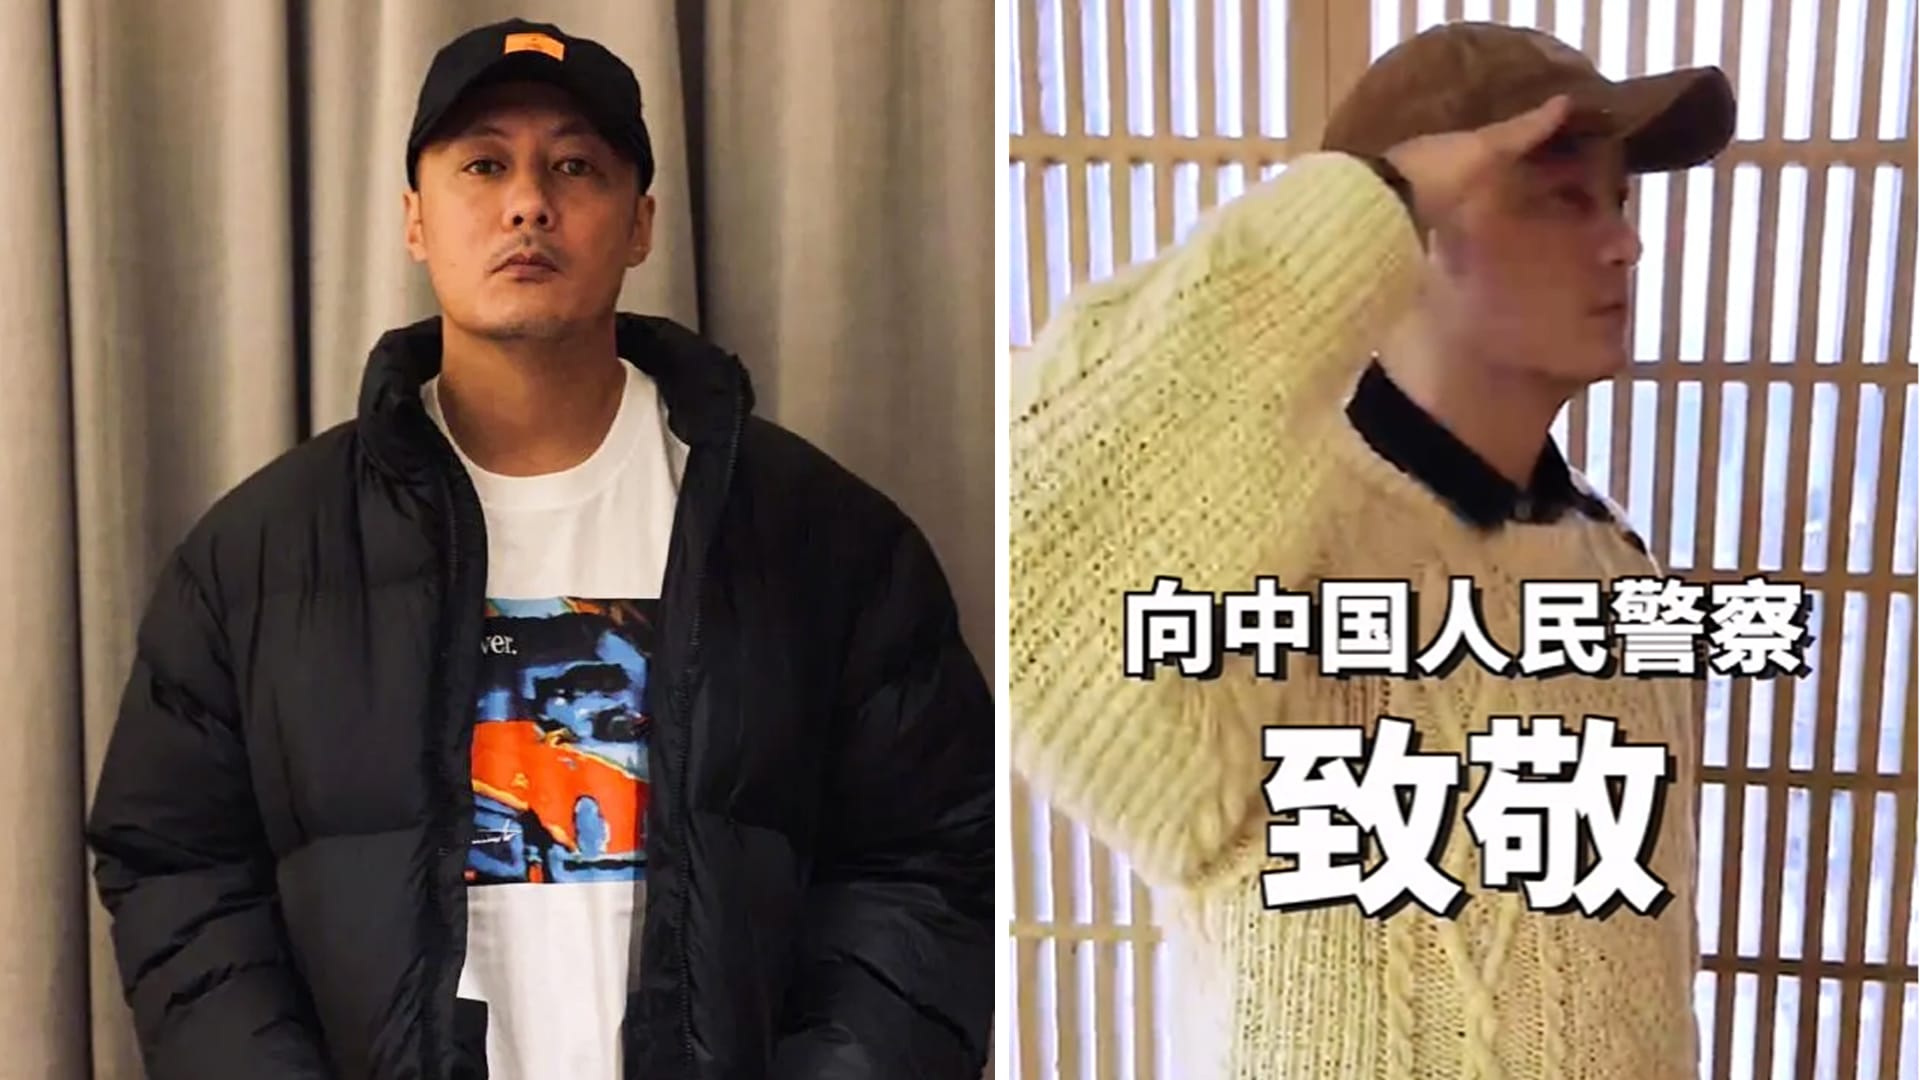 Video Of Shawn Yue Paying Tribute To China Police Angers Hongkong Netizens